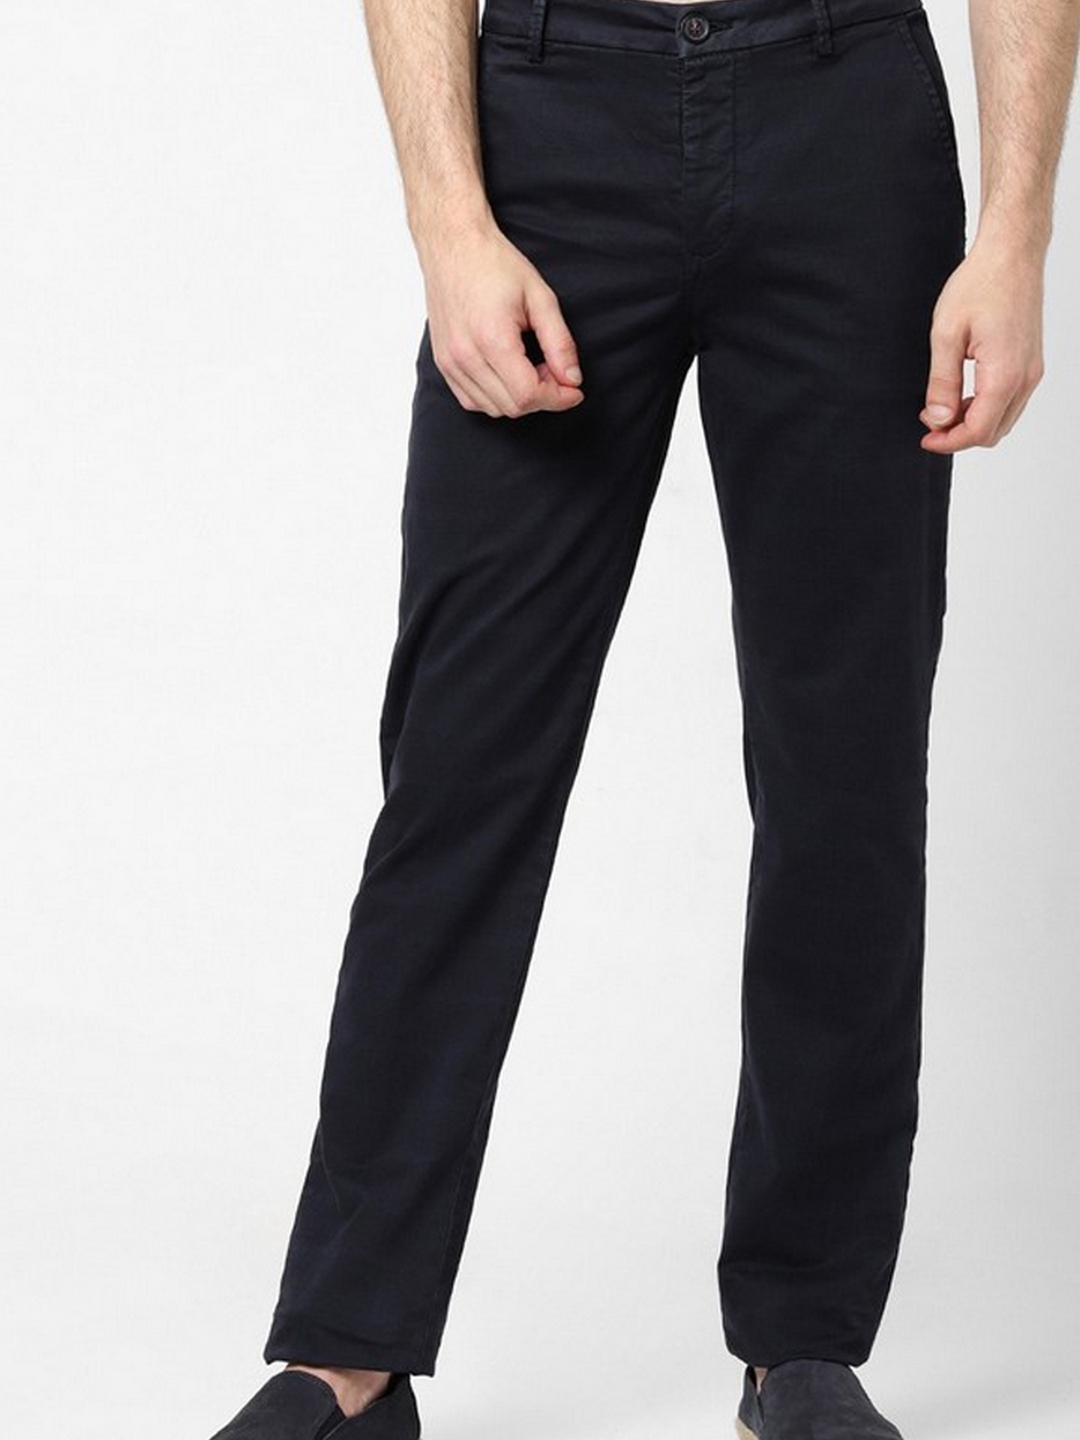 Flat Front Trouser in Navy Stretch Cotton Twill - Cad & The Dandy-atpcosmetics.com.vn